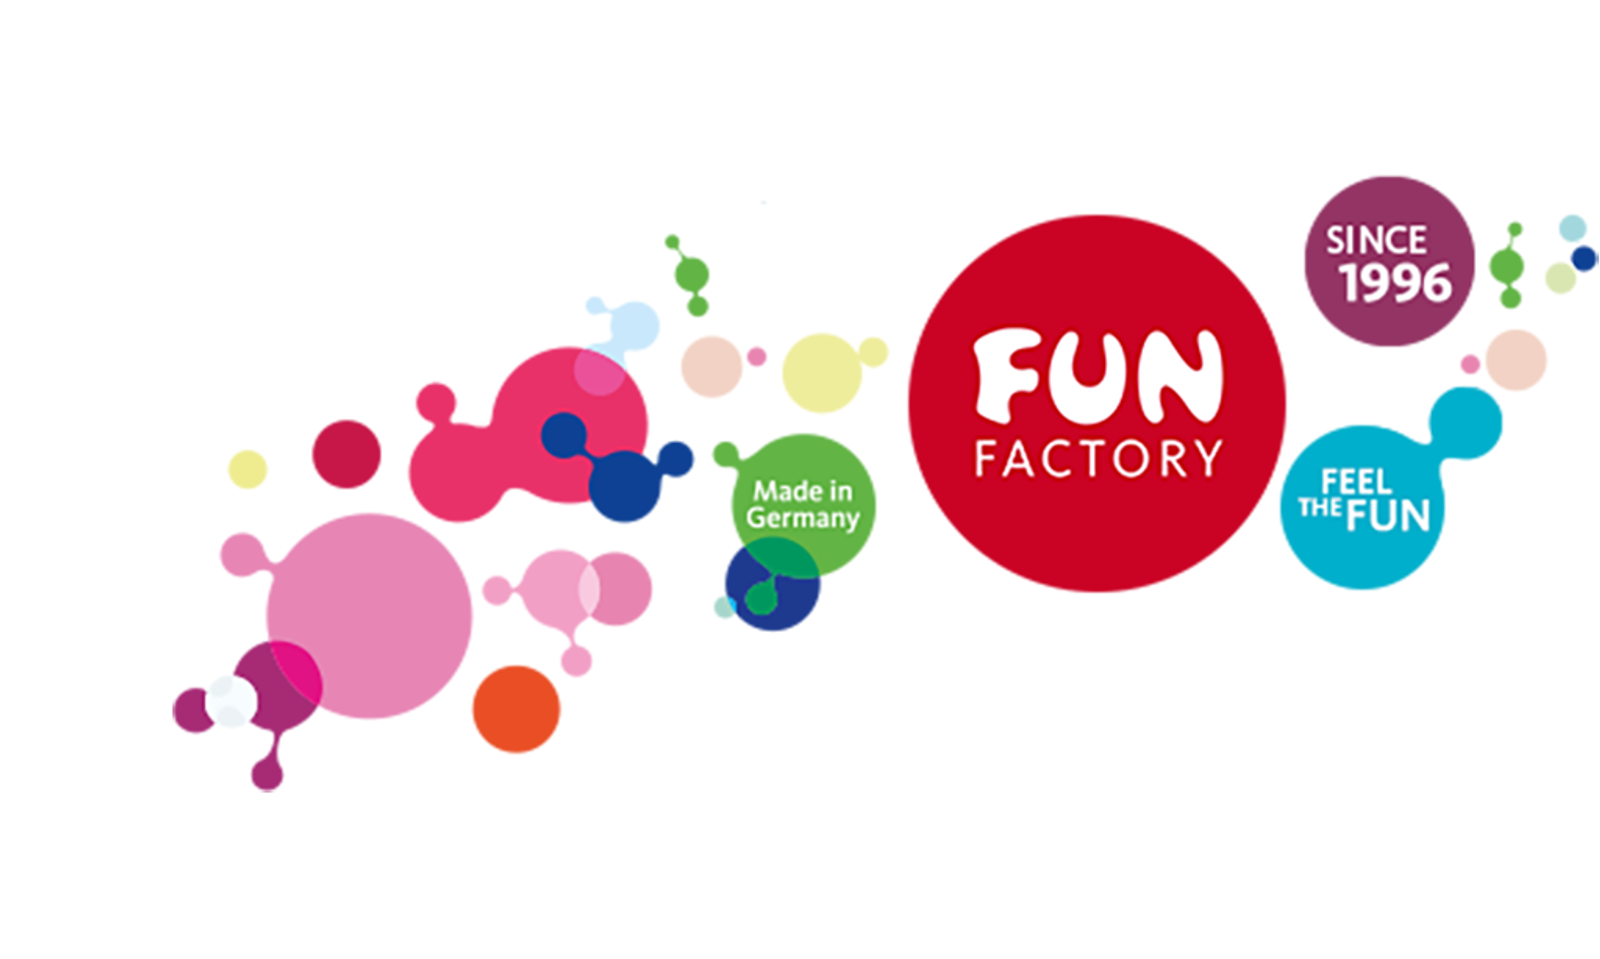 Fun Factory USA Giving Free Coloring Book, Best Coloring Prizes